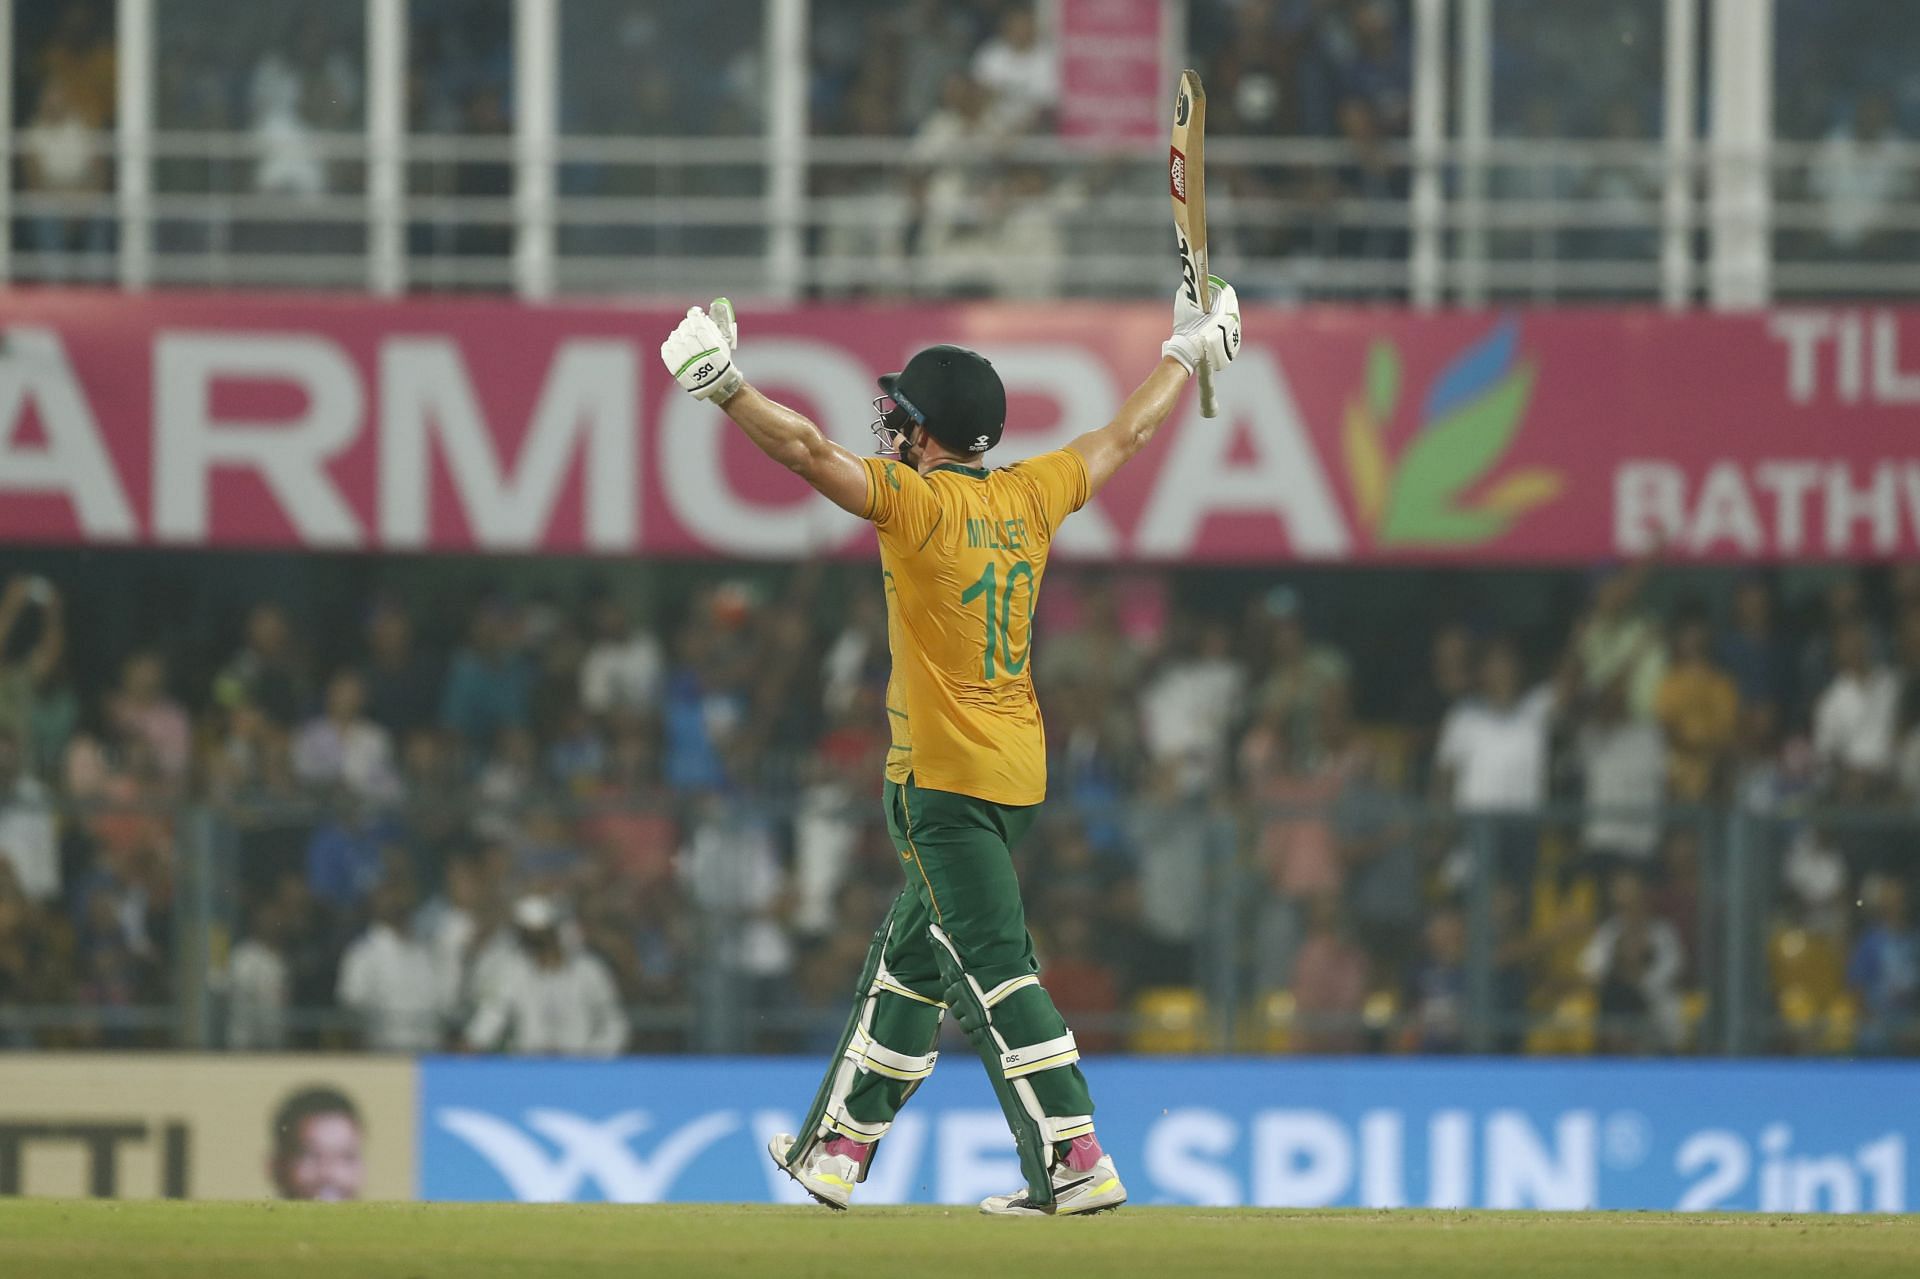 2nd T20 International: India v South Africa (Image: Getty)